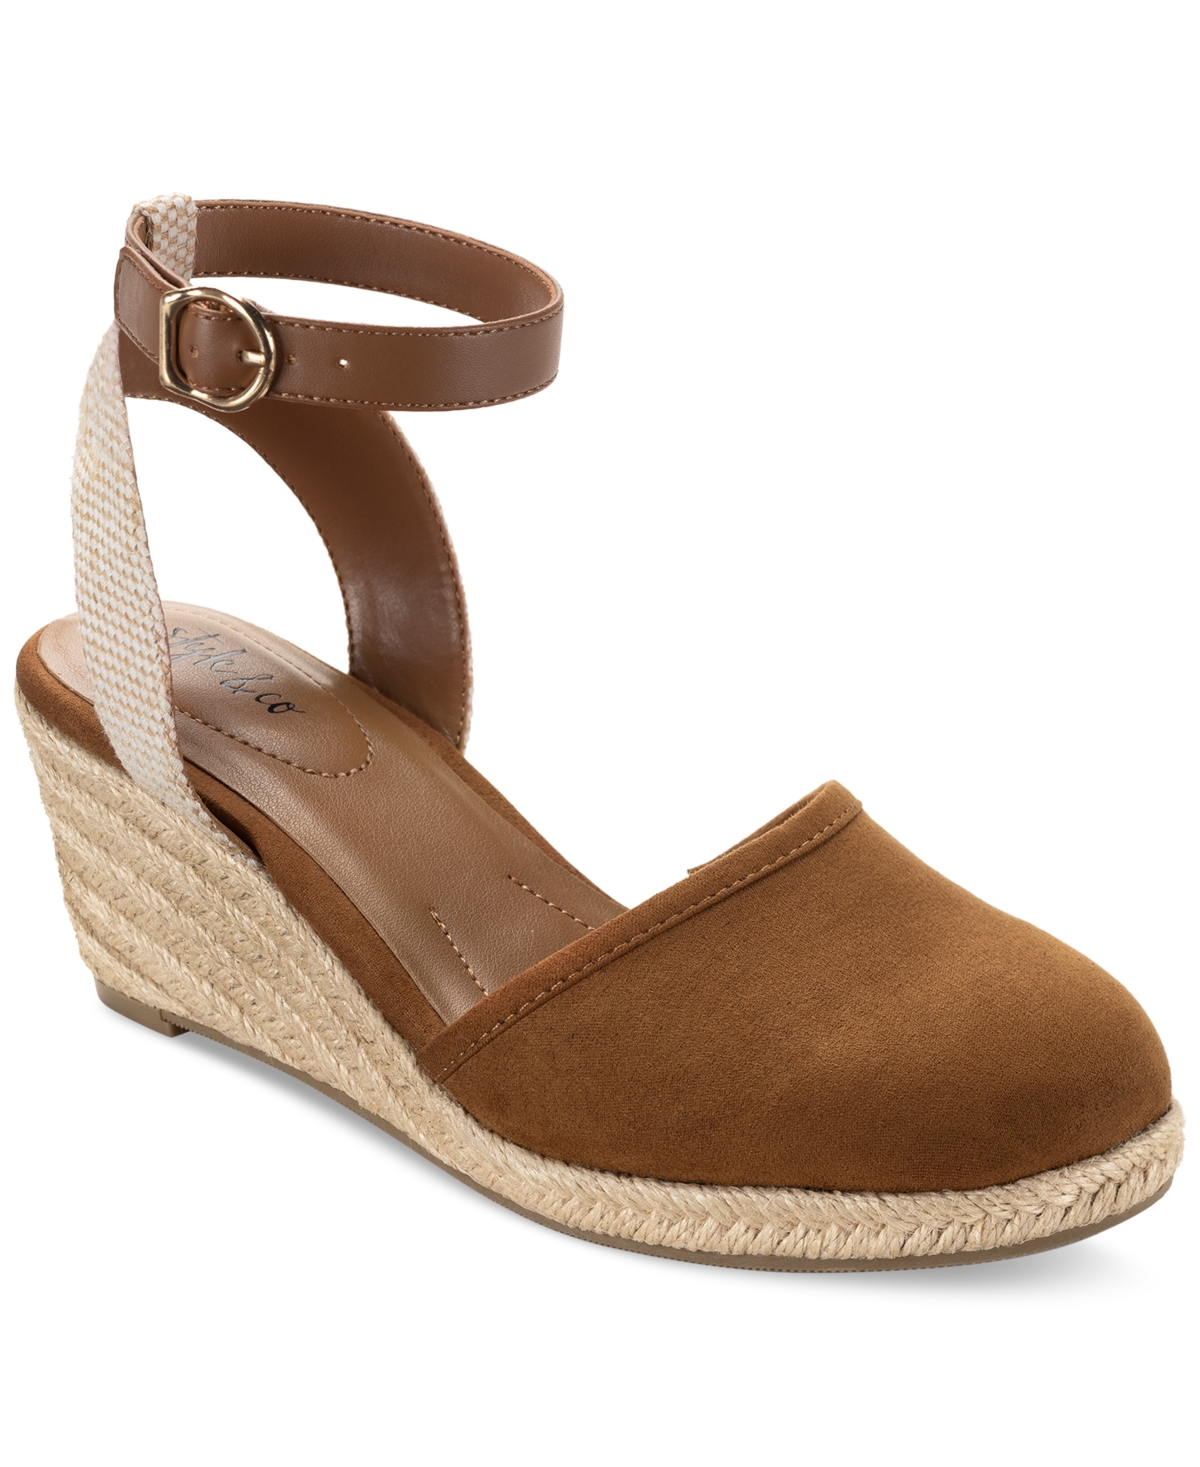 STYLE & CO MAILENA WEDGE ESPADRILLE SANDALS, CREATED FOR MACY'S